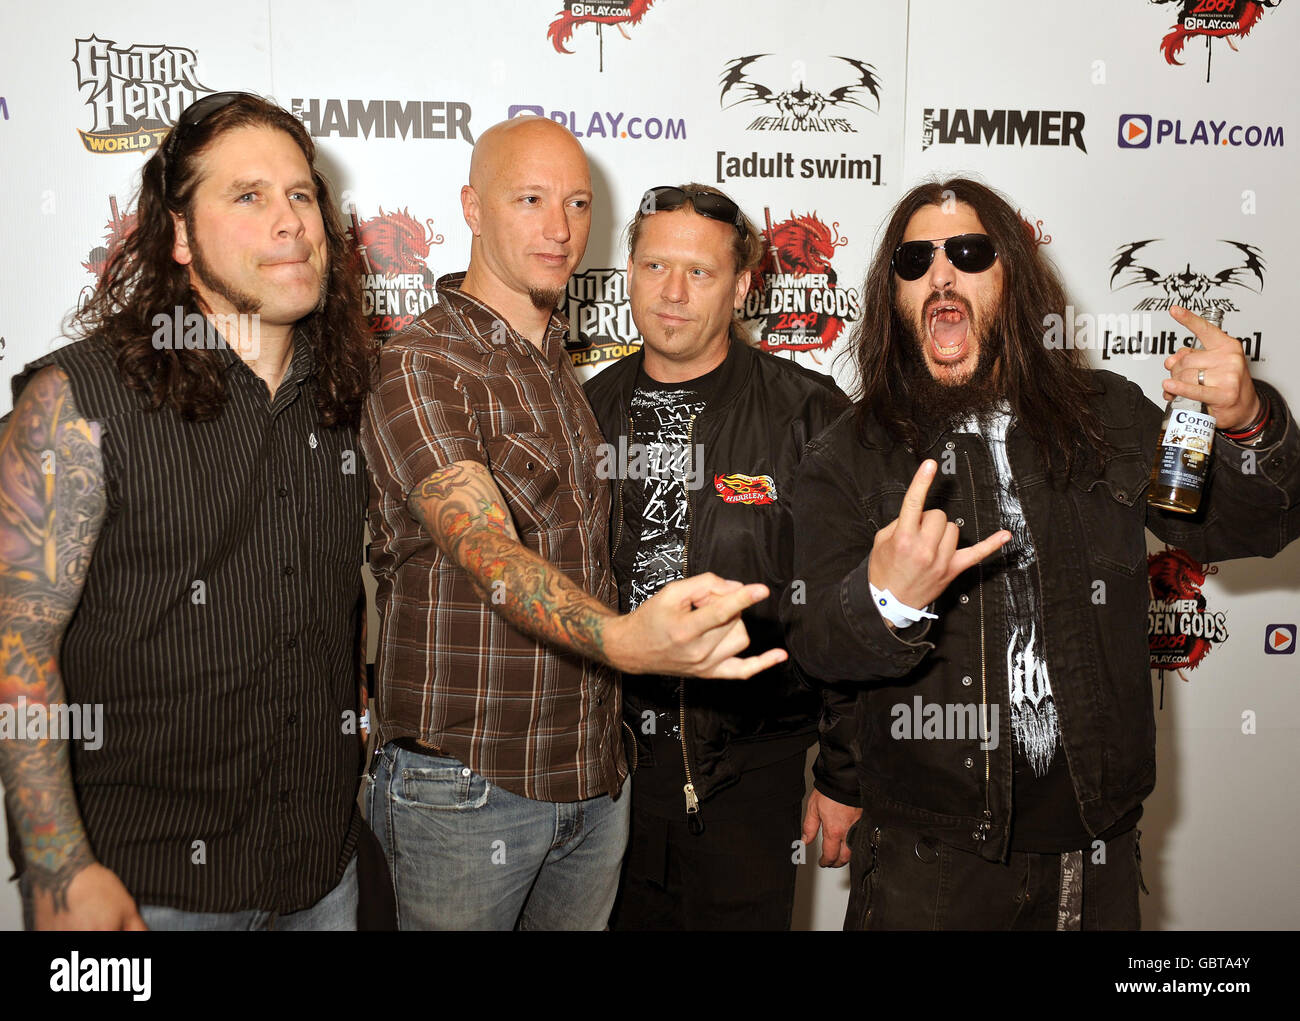 Adam Duce, Dave McClain, Phil Demmel and Robb Flynn of Machine Head arrive at the Indigo concert venue, for the Metal Hammer Golden Gods awards at the O2 Arena in Greenwich south East London. Stock Photo